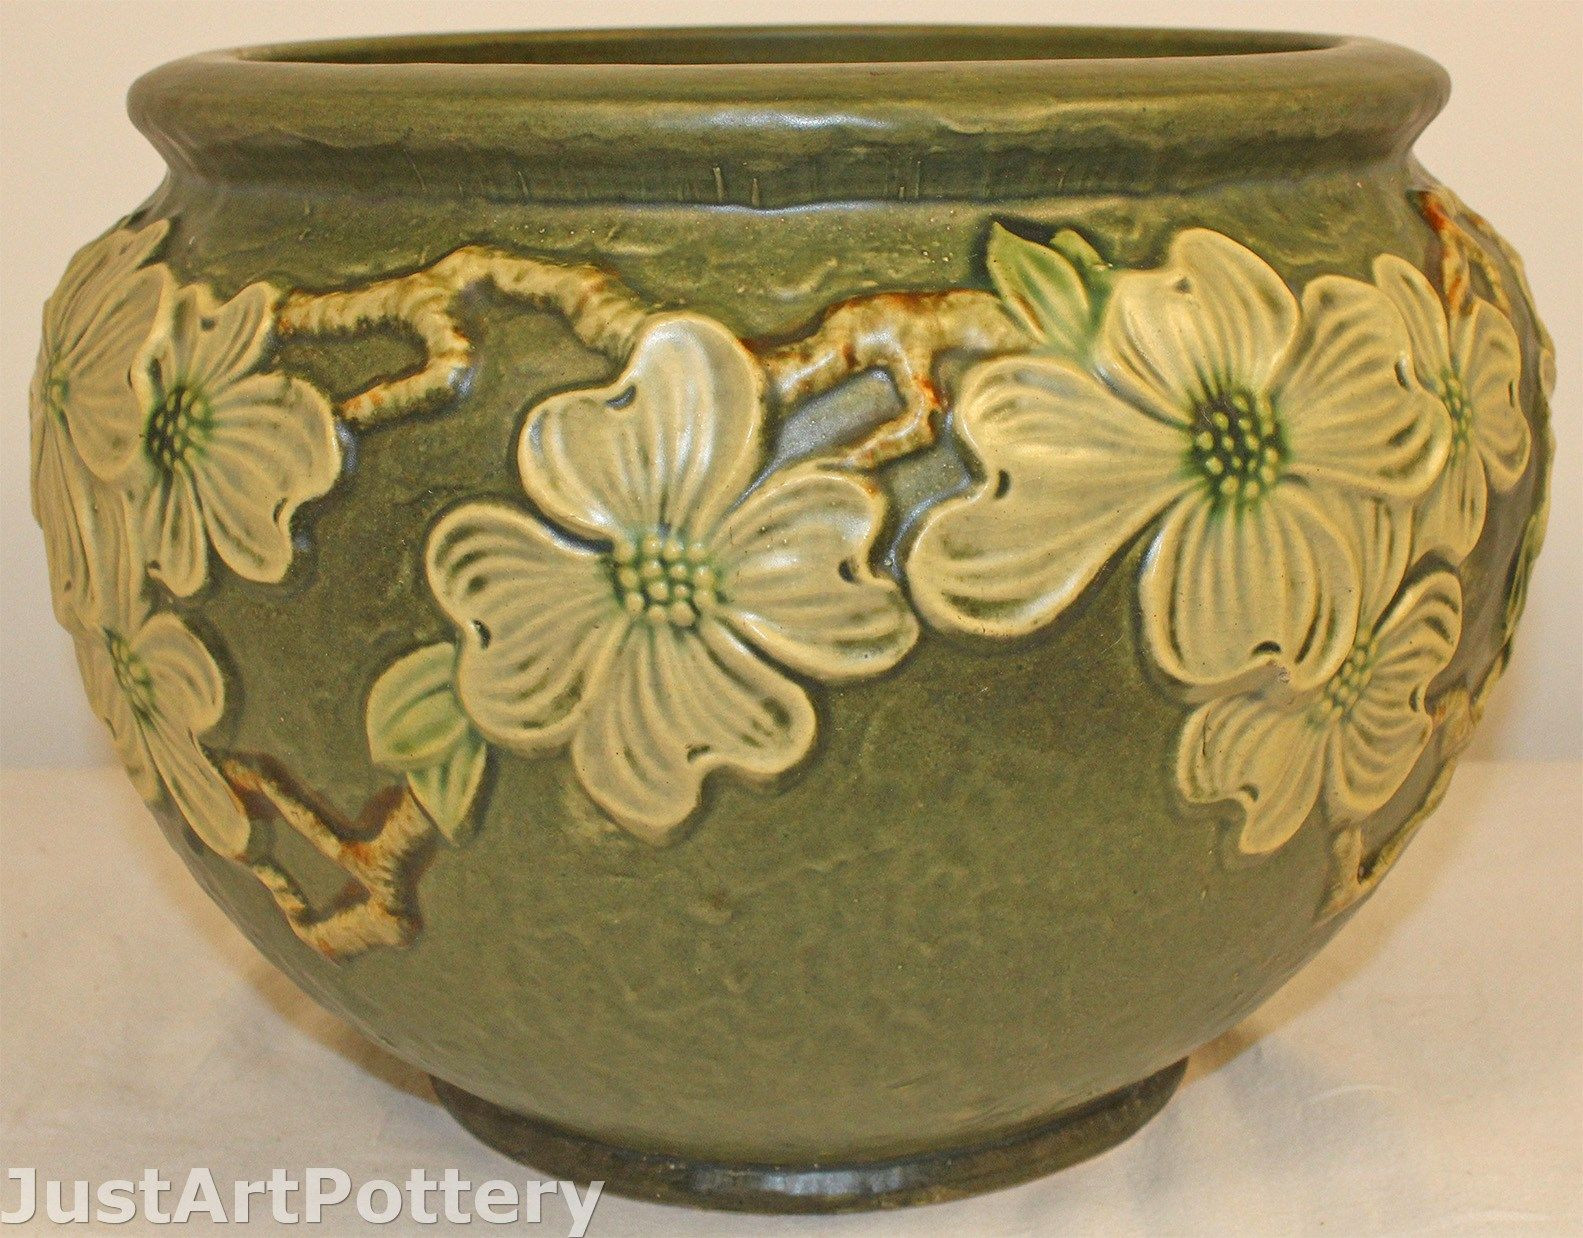 27 Nice Weller Pottery Vase 2024 free download weller pottery vase of rookwood pottery 1895 covered box shape 692 baker from j with regard to roseville pottery dogwood textured jardiniere 608 8 from just art pottery